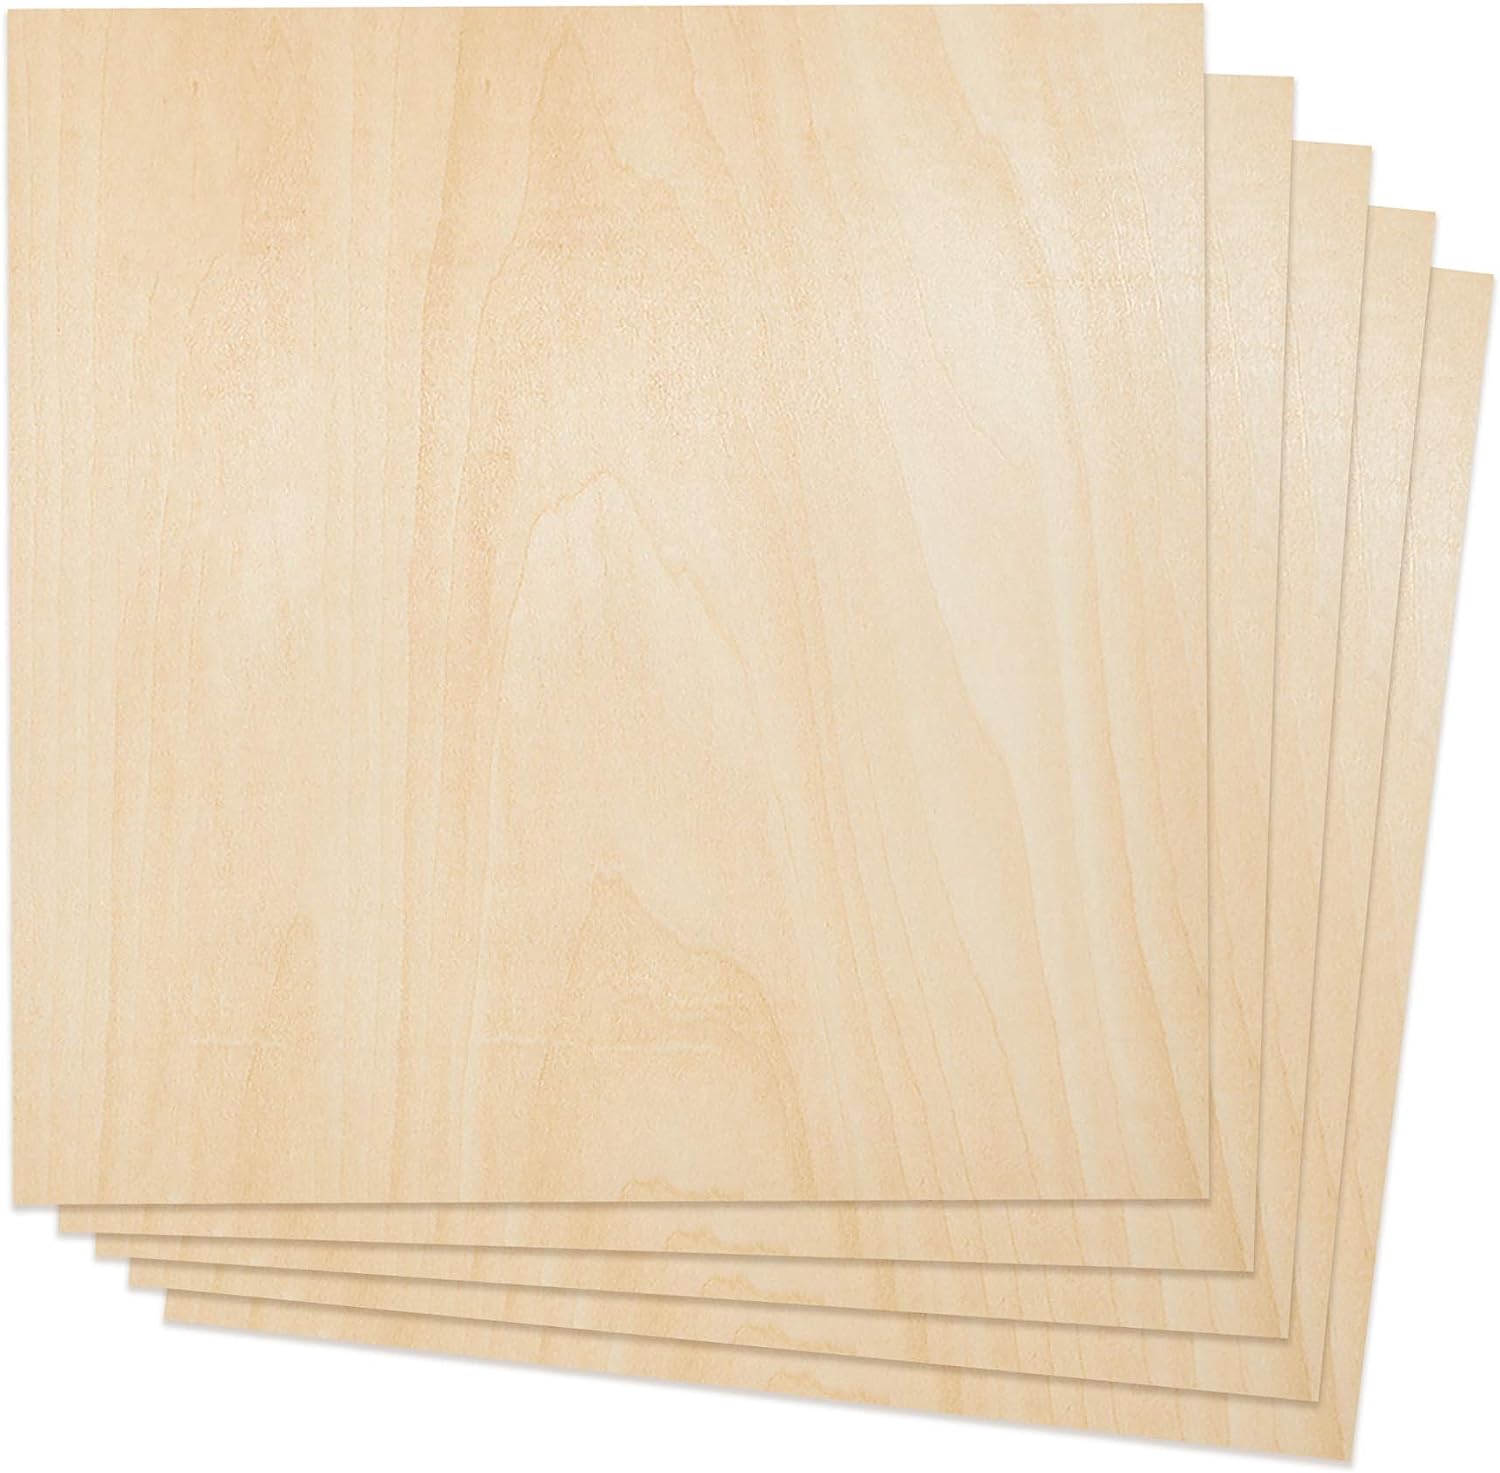 Plywood Sheet Board Squares, A Grade, 12 x 12 inch, [...]